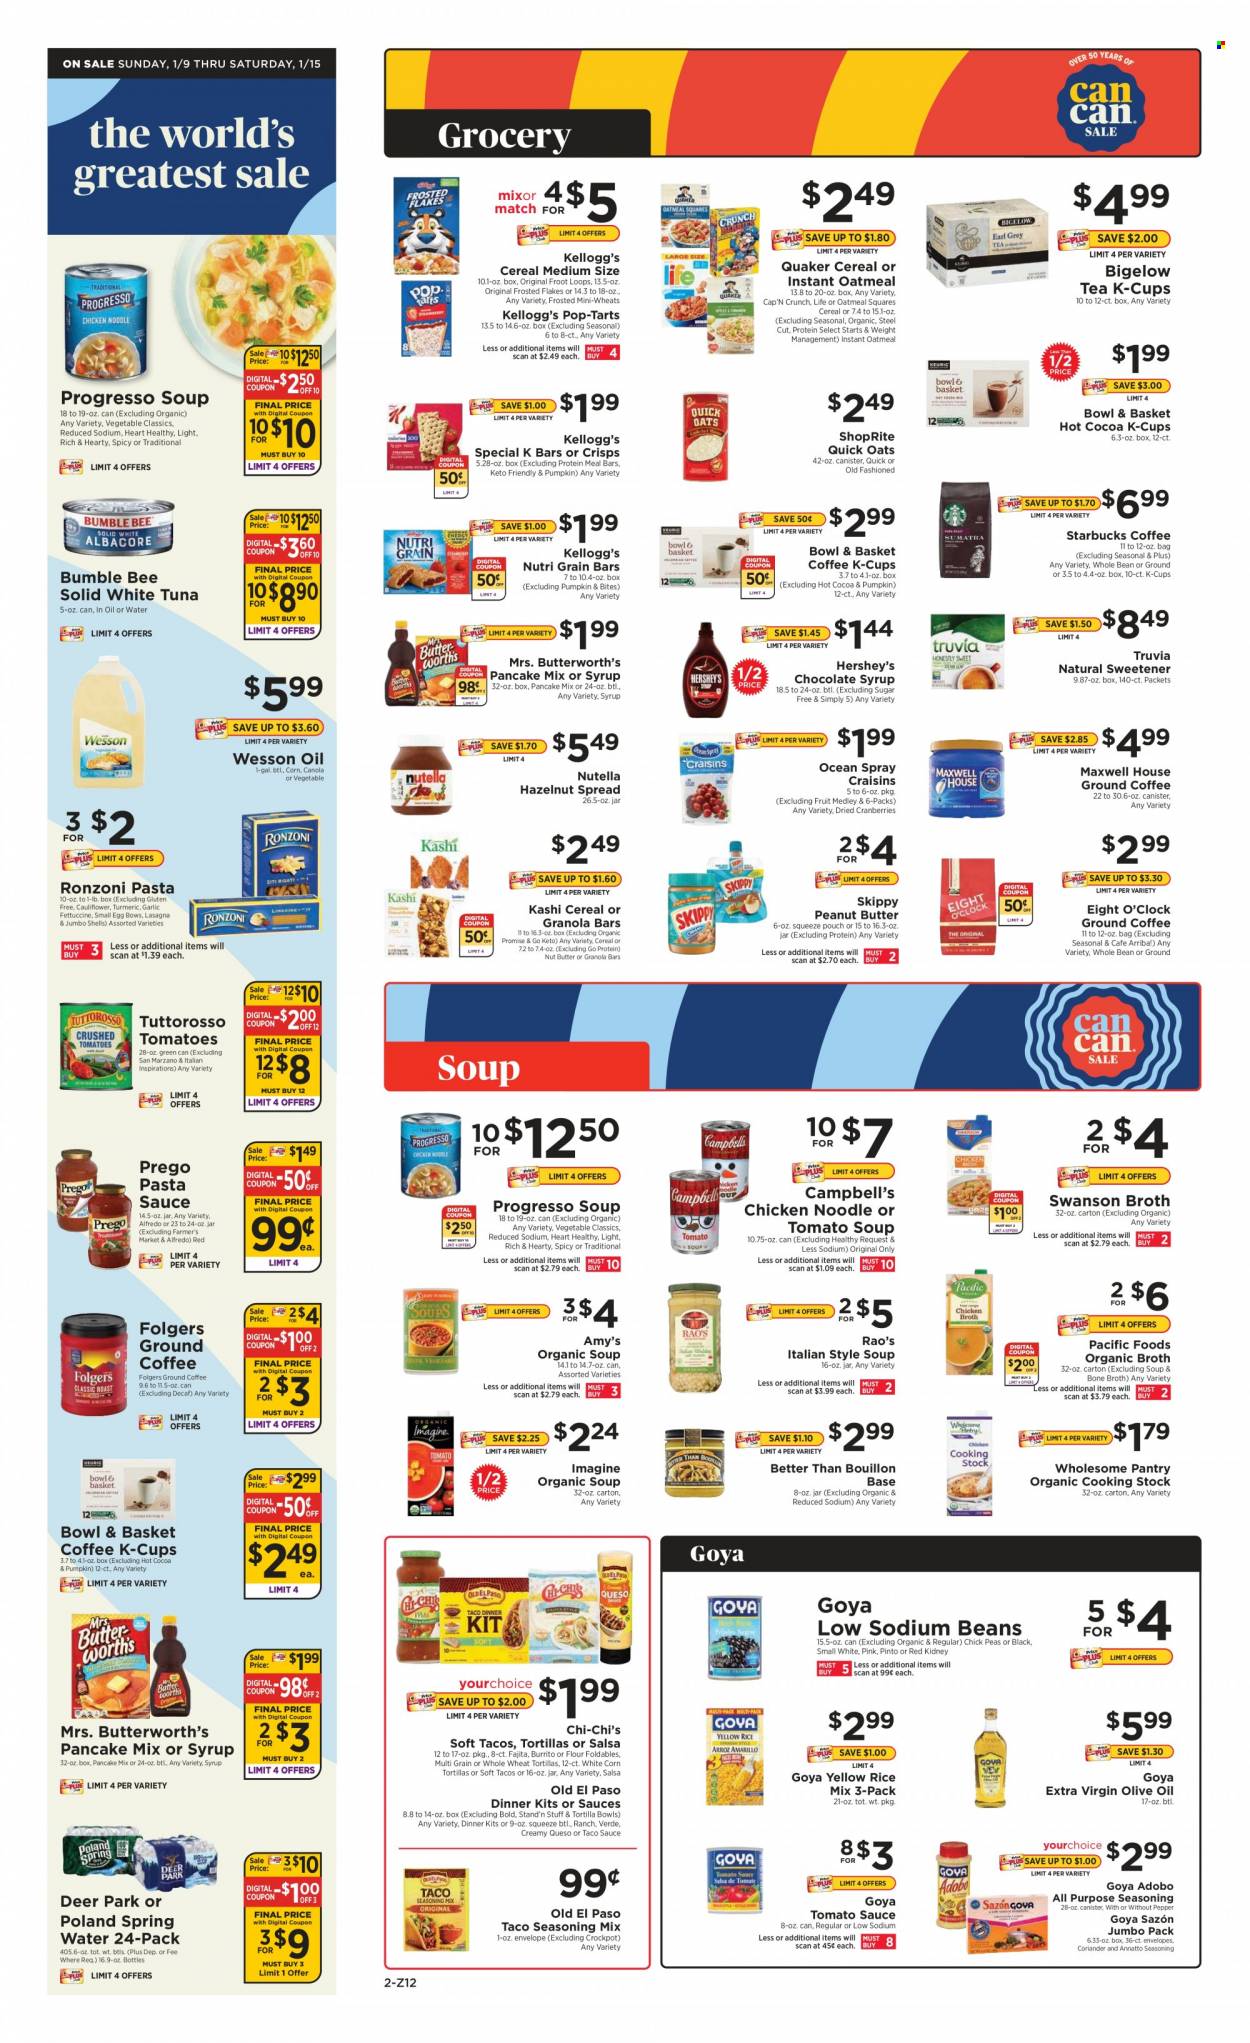 thumbnail - ShopRite Flyer - 01/09/2022 - 01/15/2022 - Sales products - corn tortillas, tortillas, Old El Paso, tacos, Bowl & Basket, garlic, tomatoes, peas, tuna, Campbell's, tomato soup, pasta sauce, Bumble Bee, pancakes, dinner kit, fajita, burrito, Quaker, noodles, Progresso, lasagna meal, eggs, Hershey's, Nutella, Kellogg's, Pop-Tarts, bouillon, oatmeal, oats, broth, sweetener, craisins, cranberries, tomato sauce, Goya, cereals, granola bar, Cap'n Crunch, Quick Oats, Frosted Flakes, Nutri-Grain, turmeric, spice, coriander, adobo sauce, taco sauce, salsa, extra virgin olive oil, olive oil, peanut butter, chocolate syrup, nut butter, hazelnut spread, dried fruit, spring water, hot cocoa, Maxwell House, tea, Starbucks, Folgers, coffee capsules, K-Cups, Eight O'Clock, envelope. Page 2.